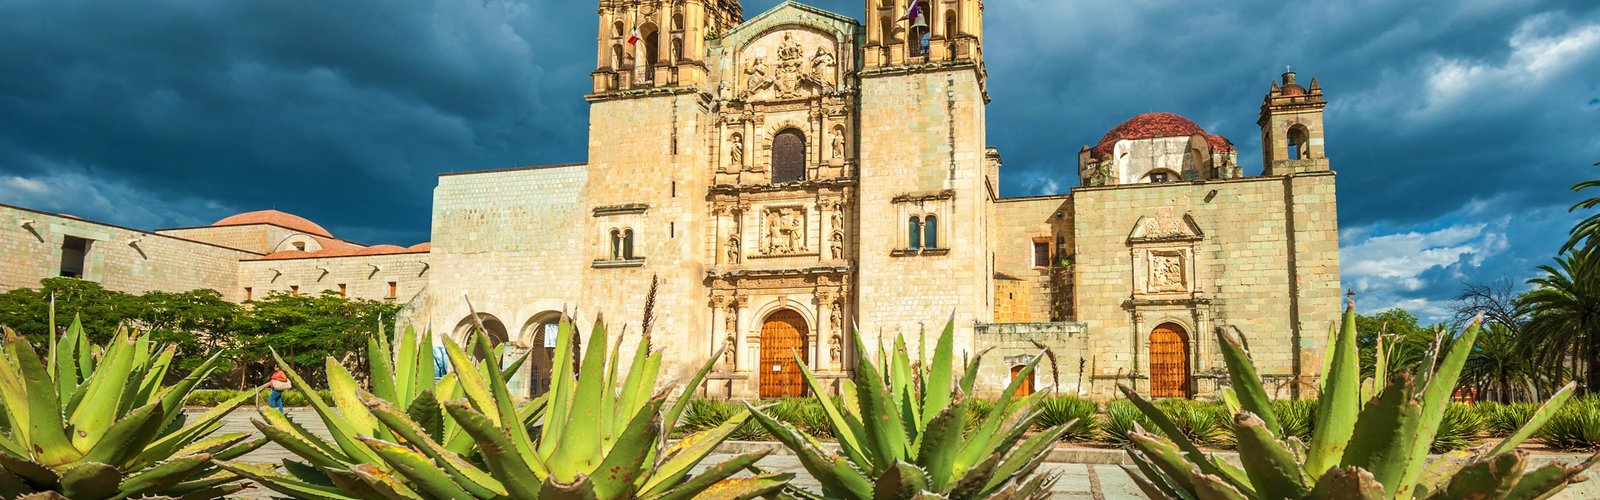 Agave plants in front of a grand building in Mexico